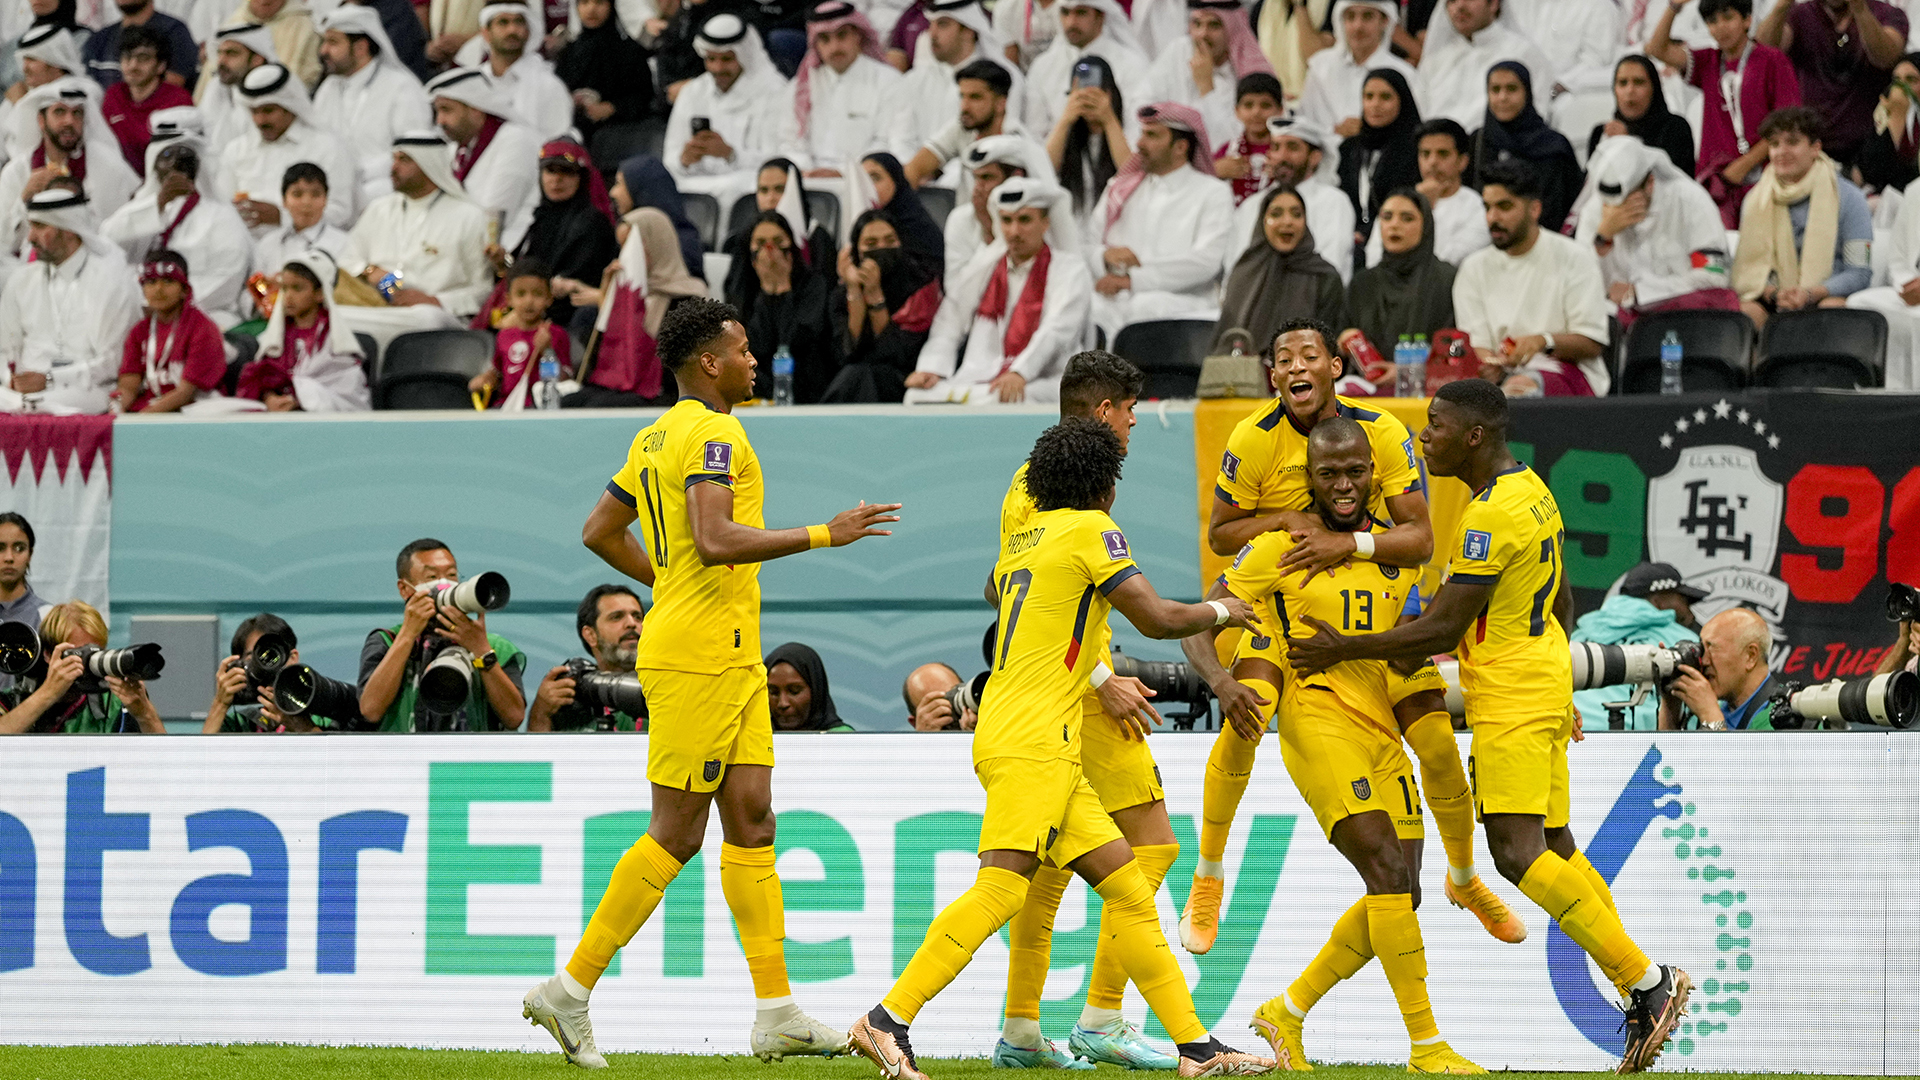 Enner Valencia of Ecuador , Celebrates the 0:1 goal, which was pulled back for offside during the FIFA World Cup Qatar 2022 Group A match between Qatar and Ecuador at Al Bayt Stadium on November 20, 2022 in Al Khor, Qatar.